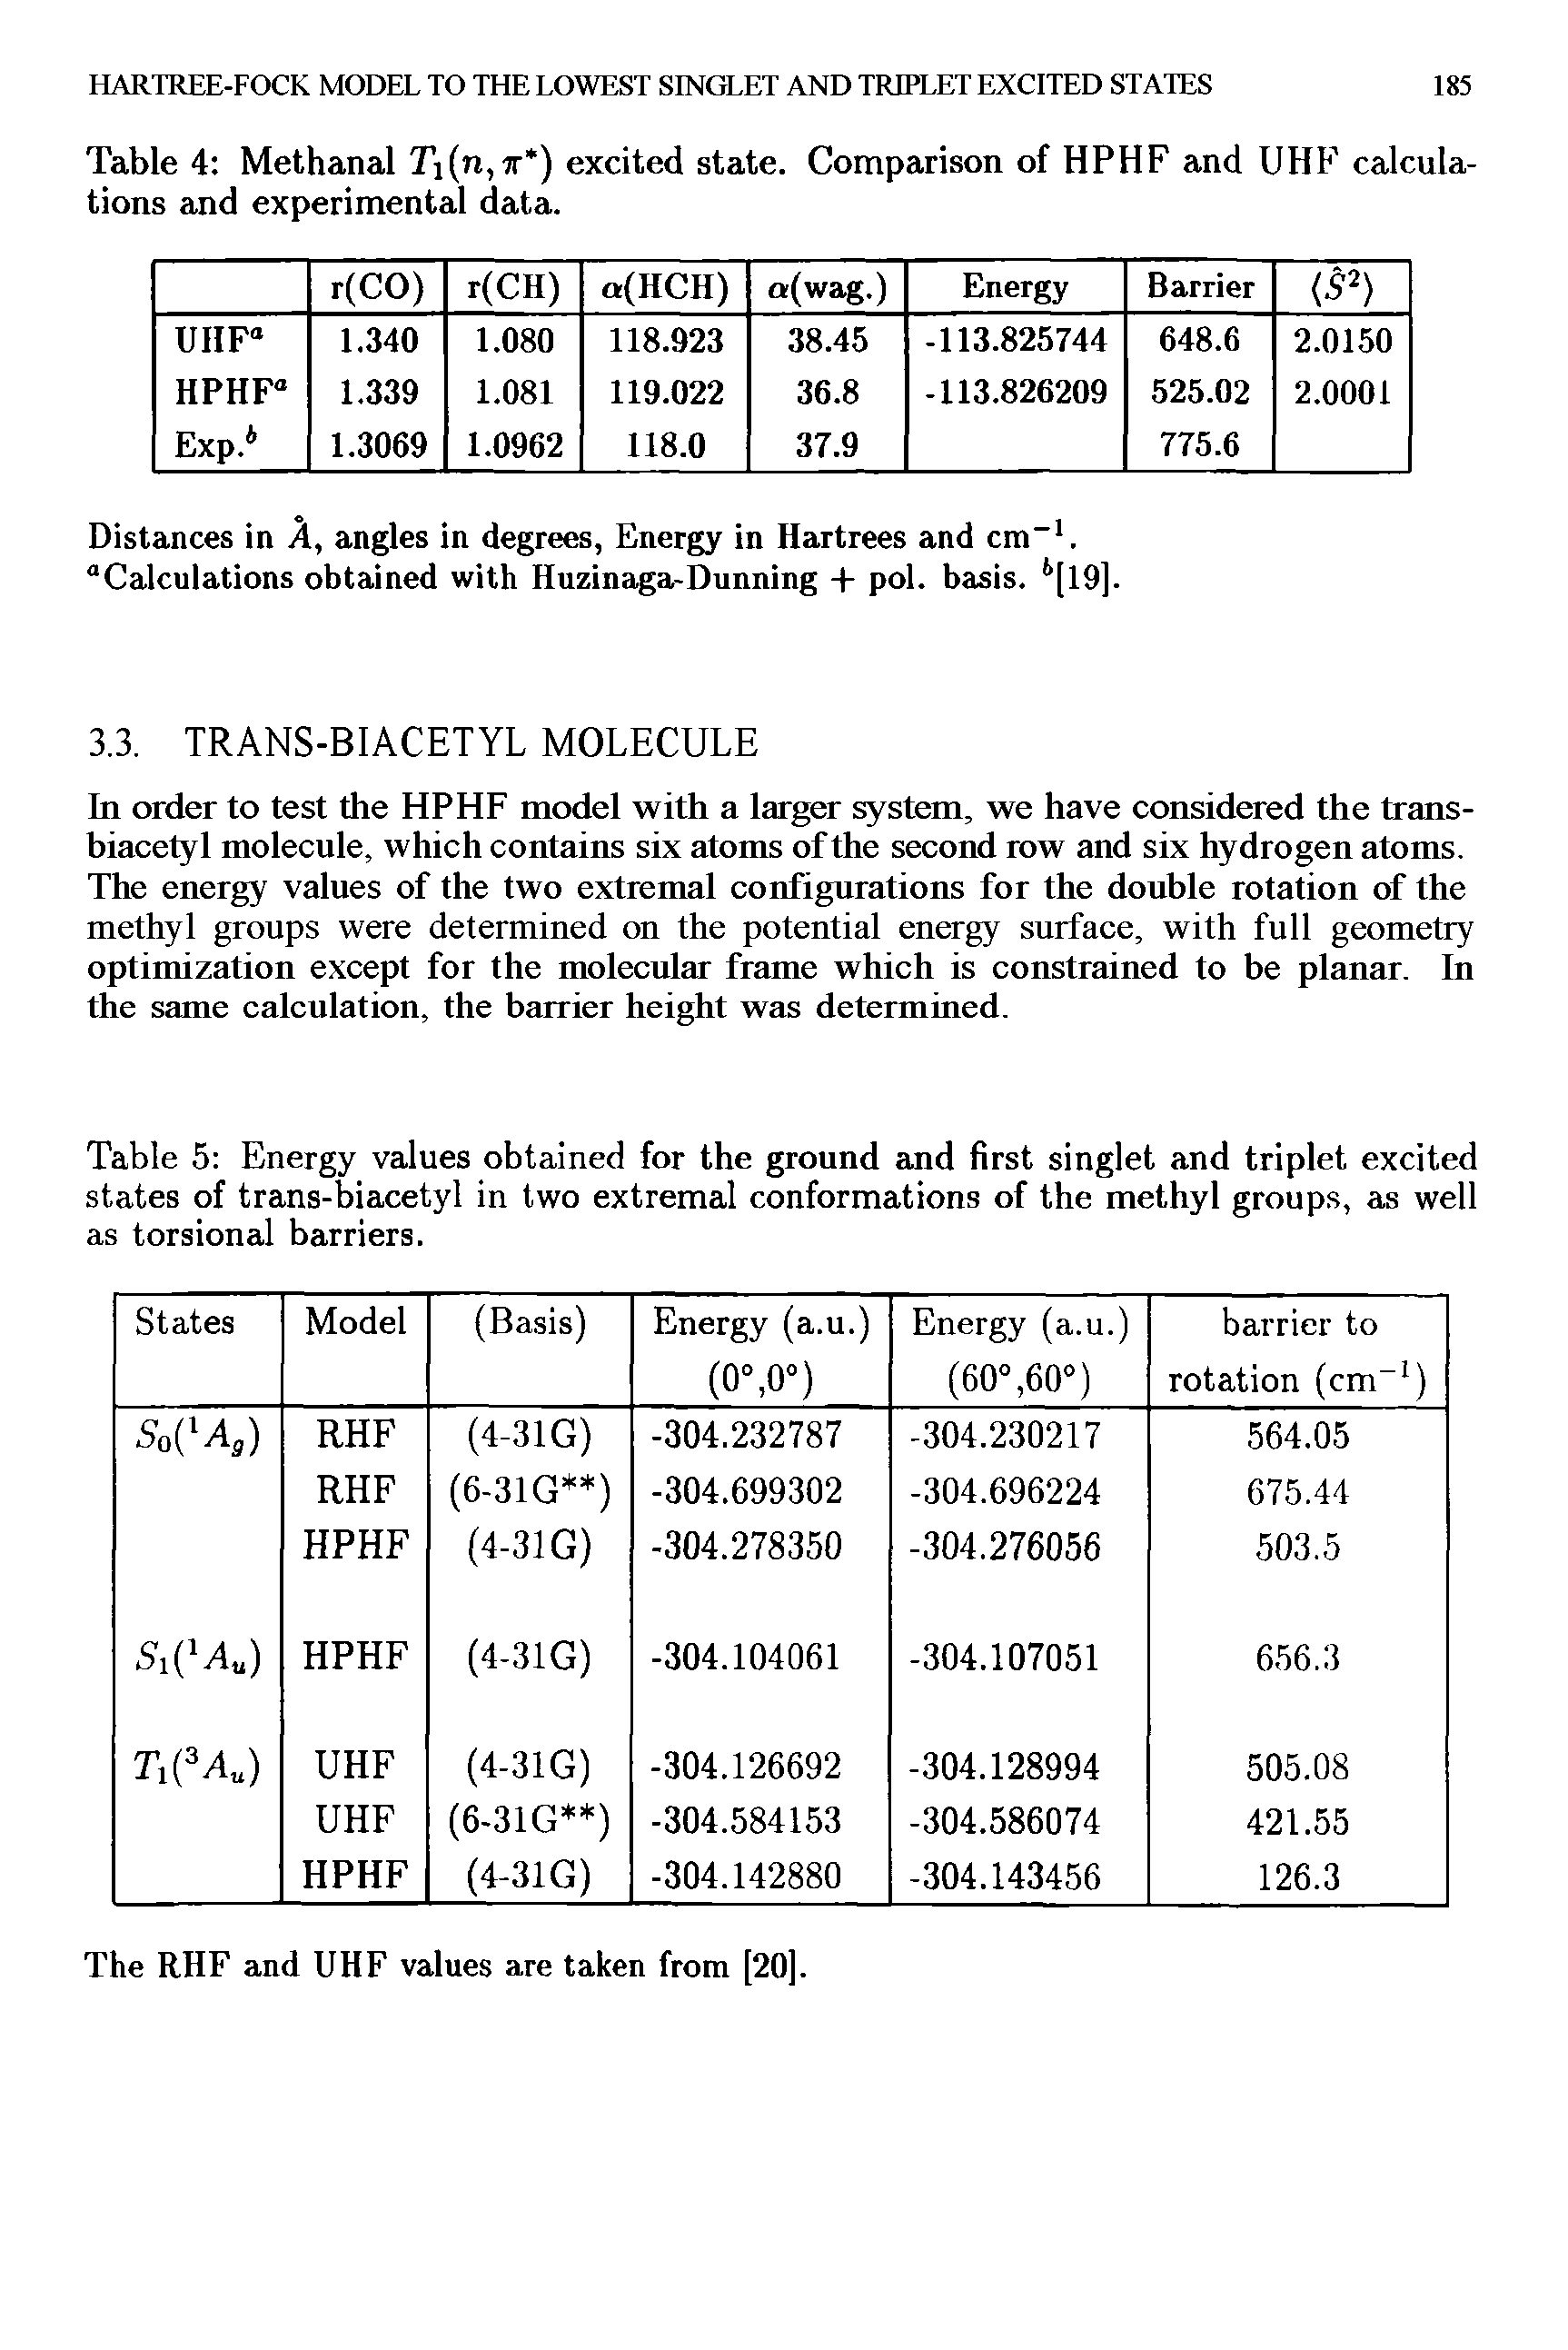 Table 5 Energy values obtained for the ground and first singlet and triplet excited states of trans-biacetyl in two extremal conformations of the methyl groups, as well as torsional barriers.